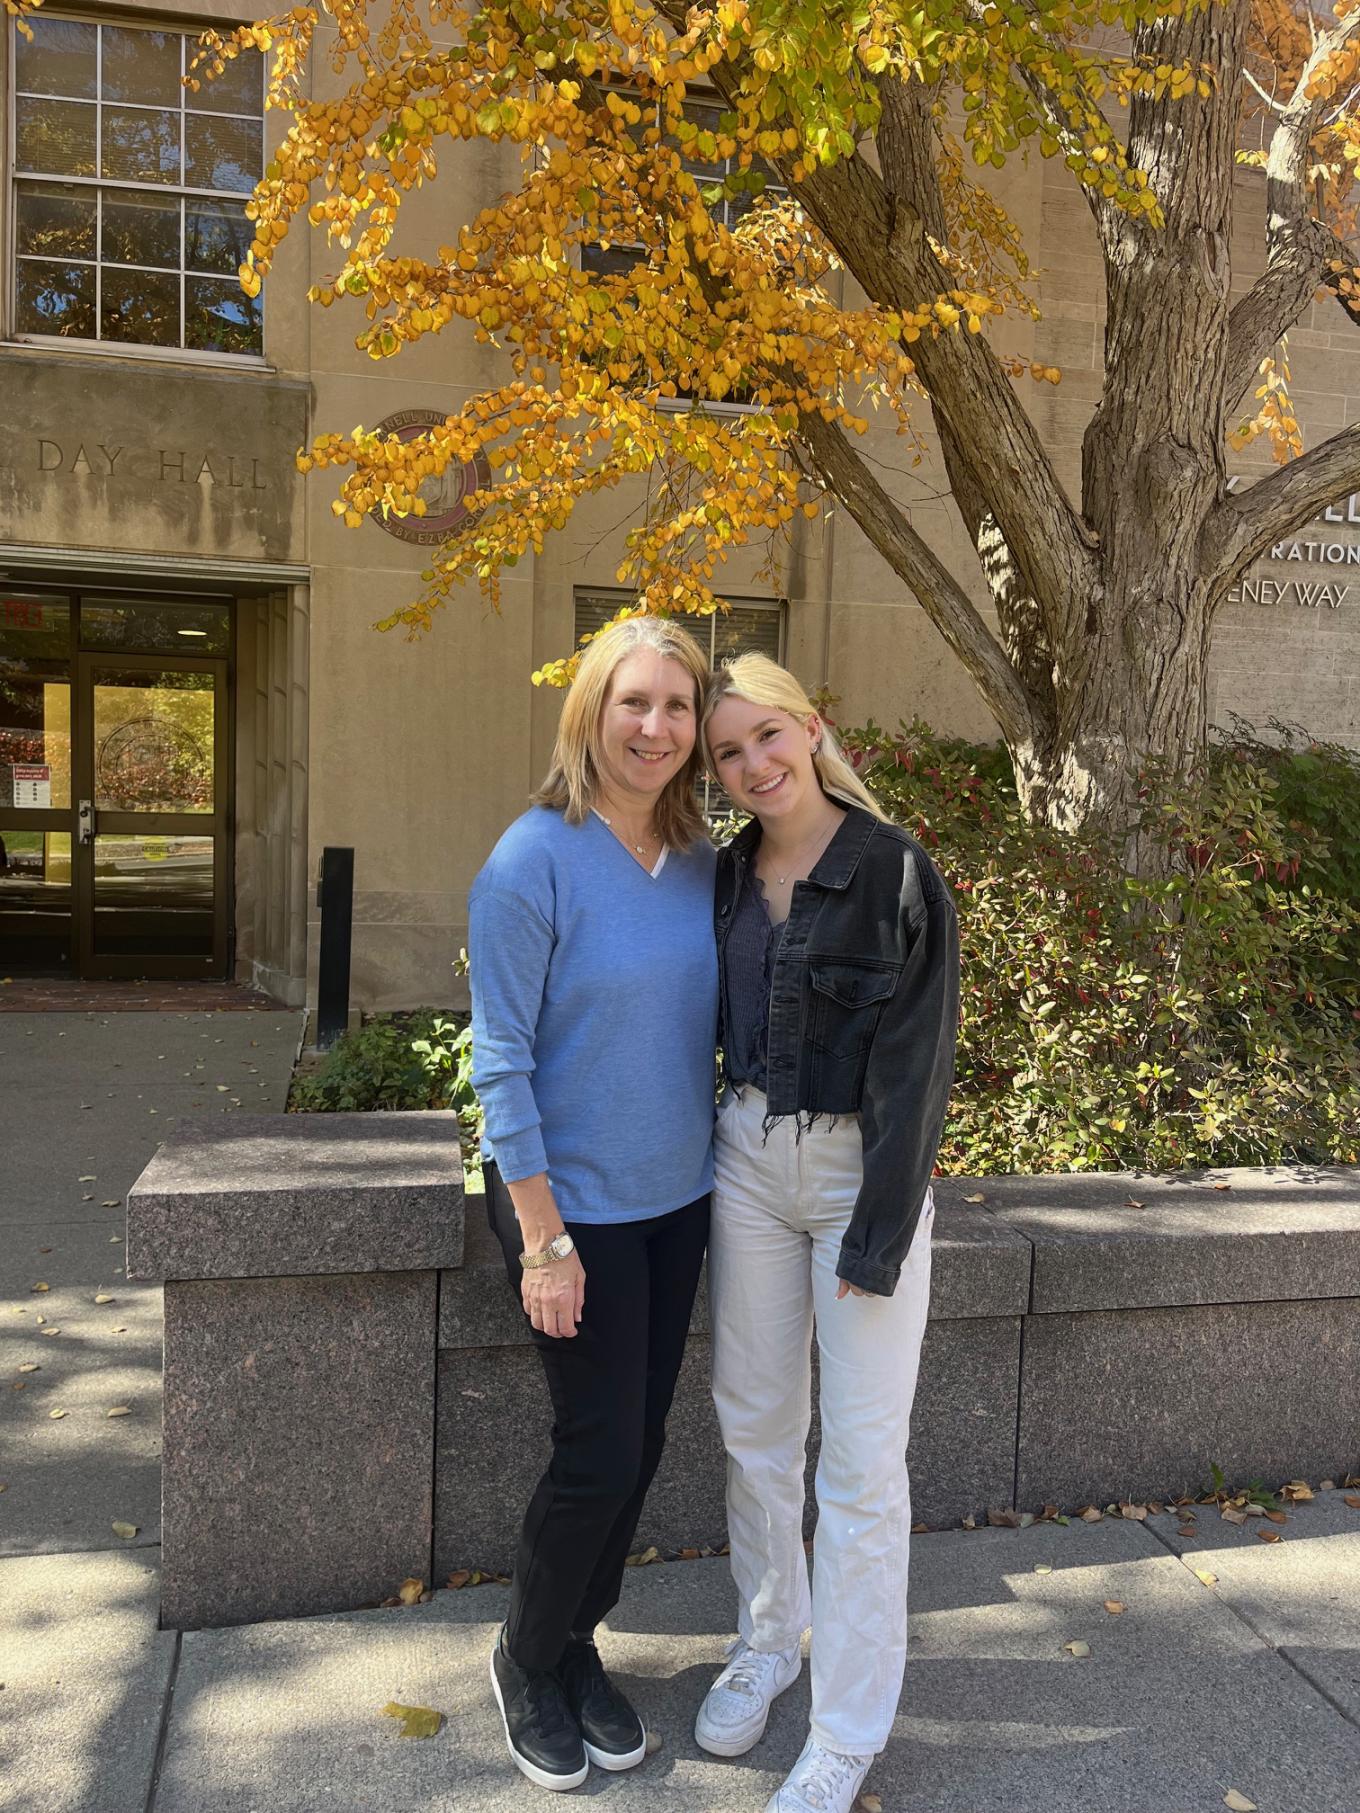 Lauren Ezrol Klein ’88 with daughter, Charlotte Klein ’26 outside of Day Hall at Cornell University